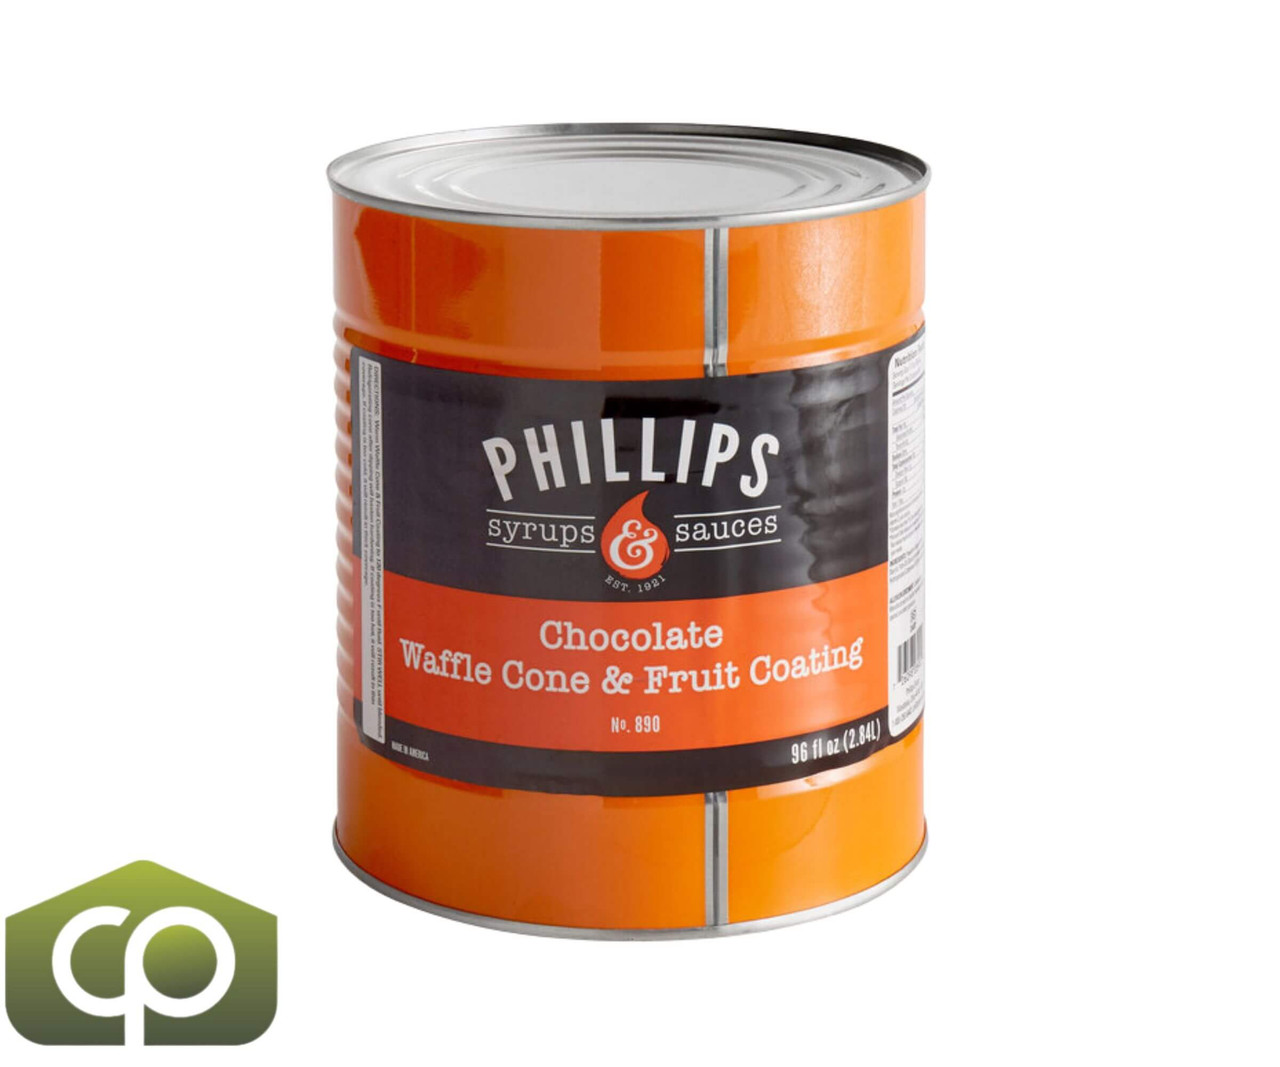 Phillips Chocolate Ice Cream Cone Dip and Fruit Coating - 8 lbs. (3.63 kg) - #10 Can-Chicken Pieces